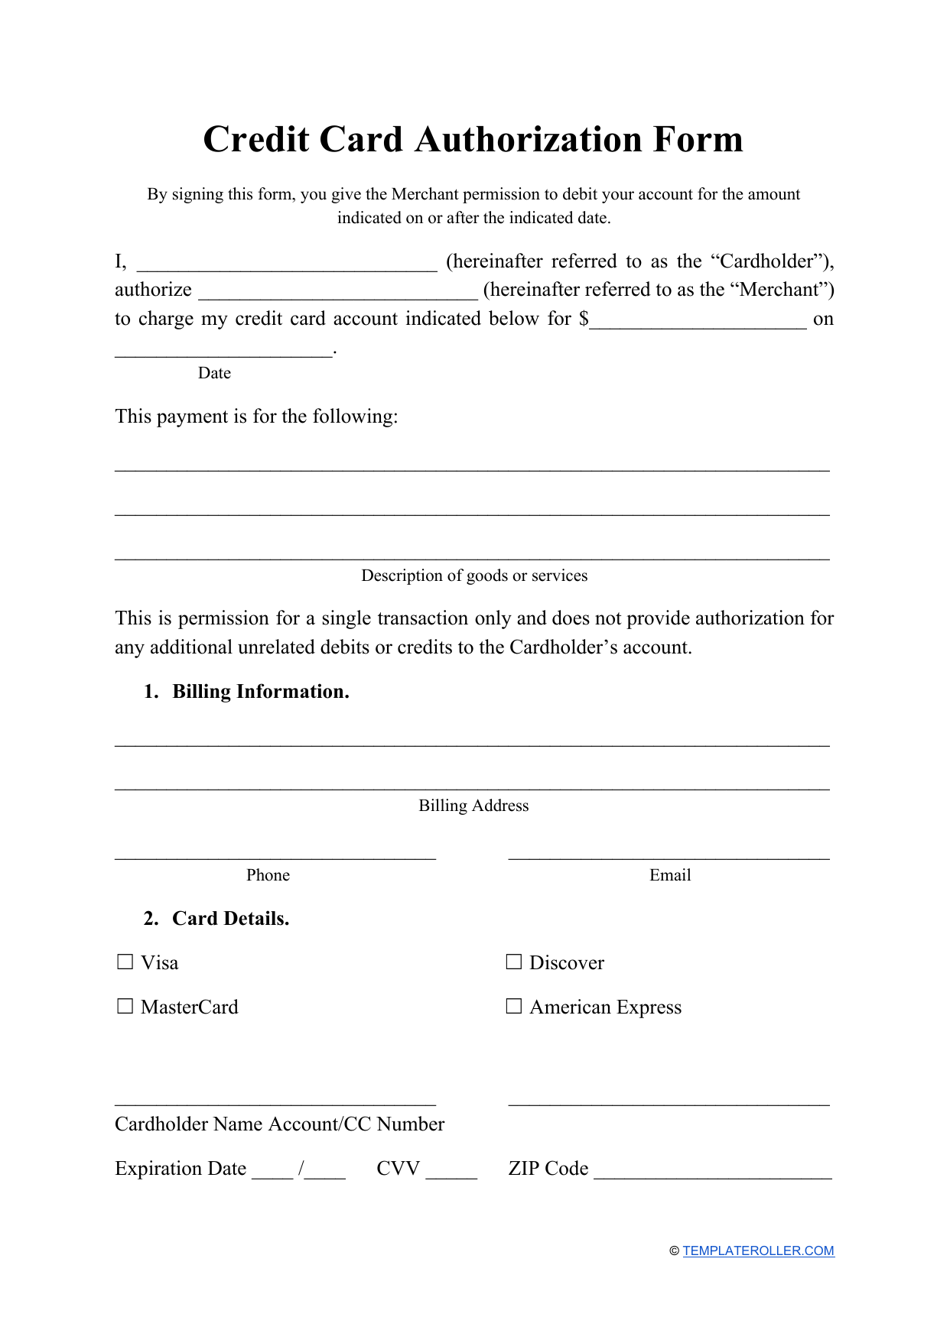 Credit Card Authorization Form Download Printable PDF  Templateroller For Authorization To Charge Credit Card Template